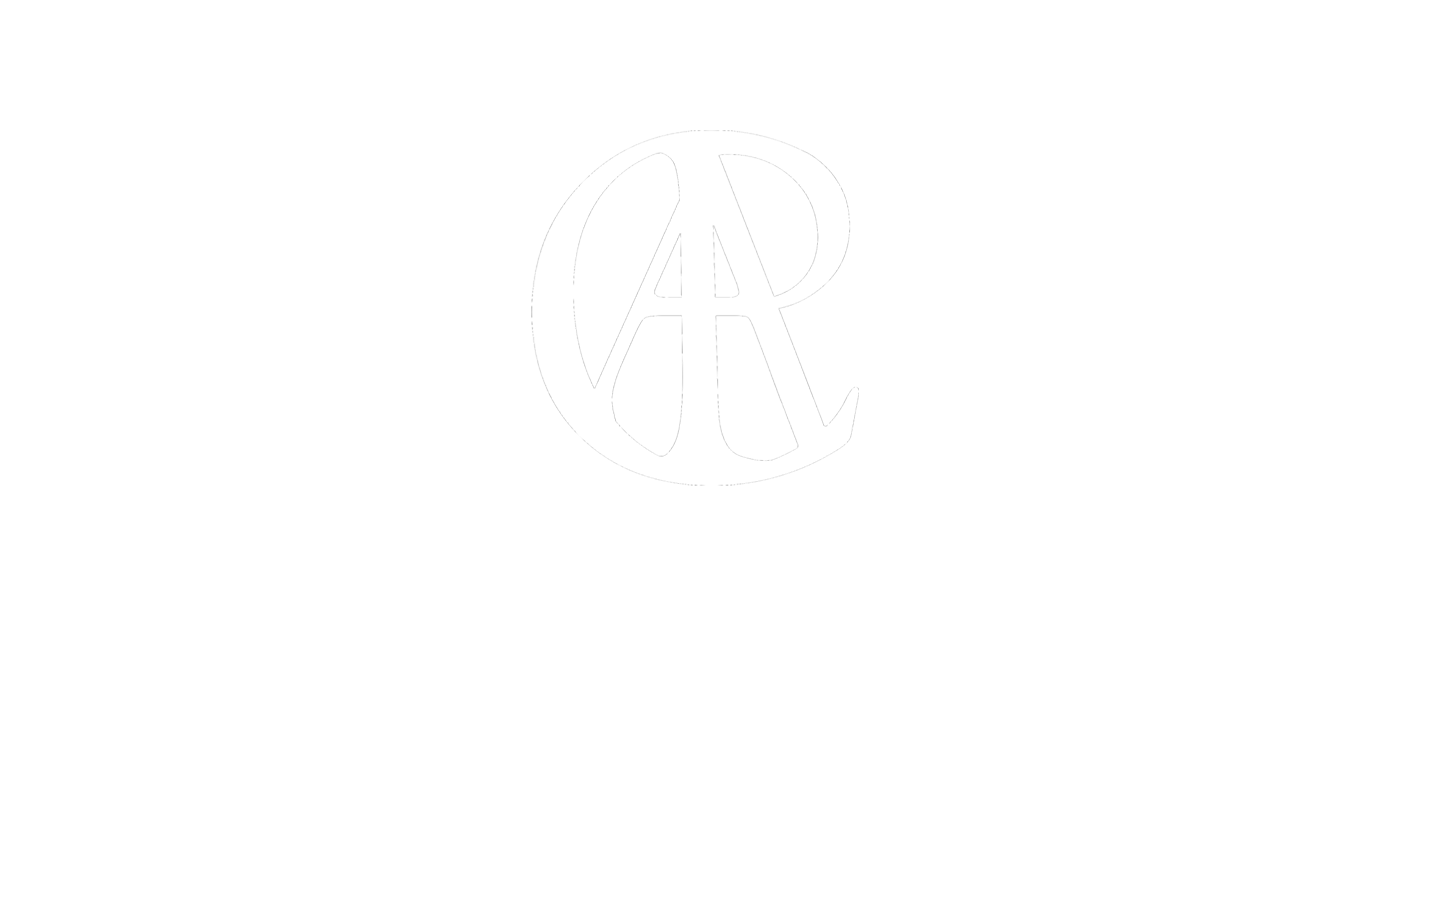 By Campfire